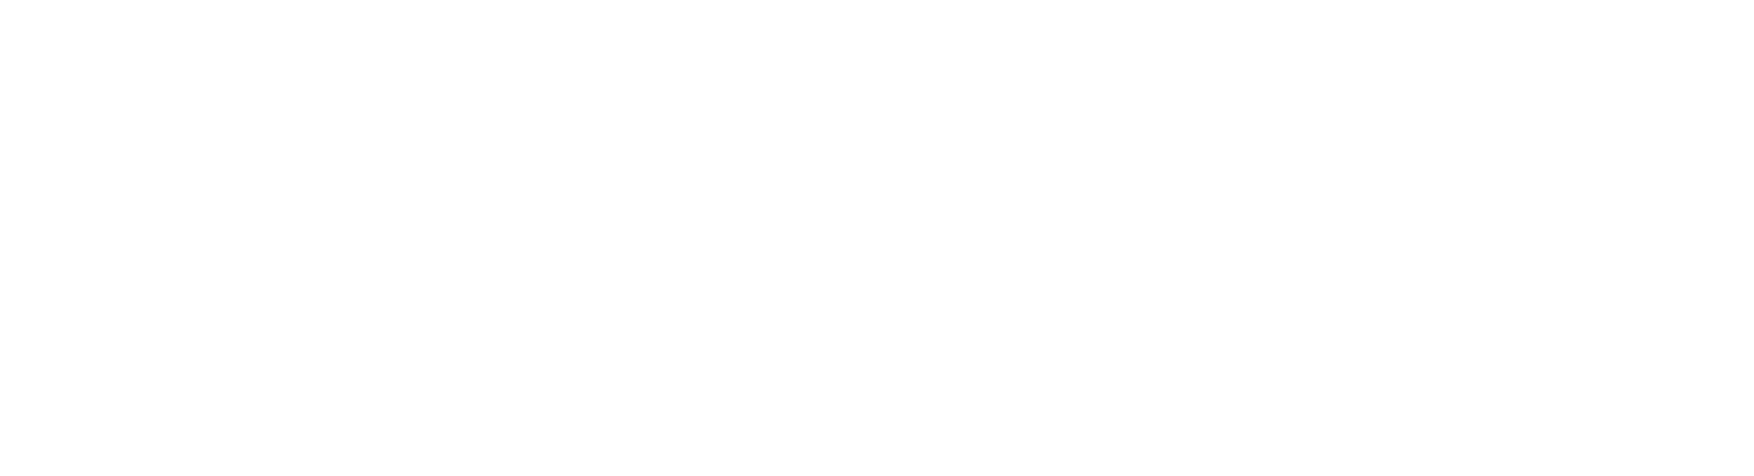  Two west logo